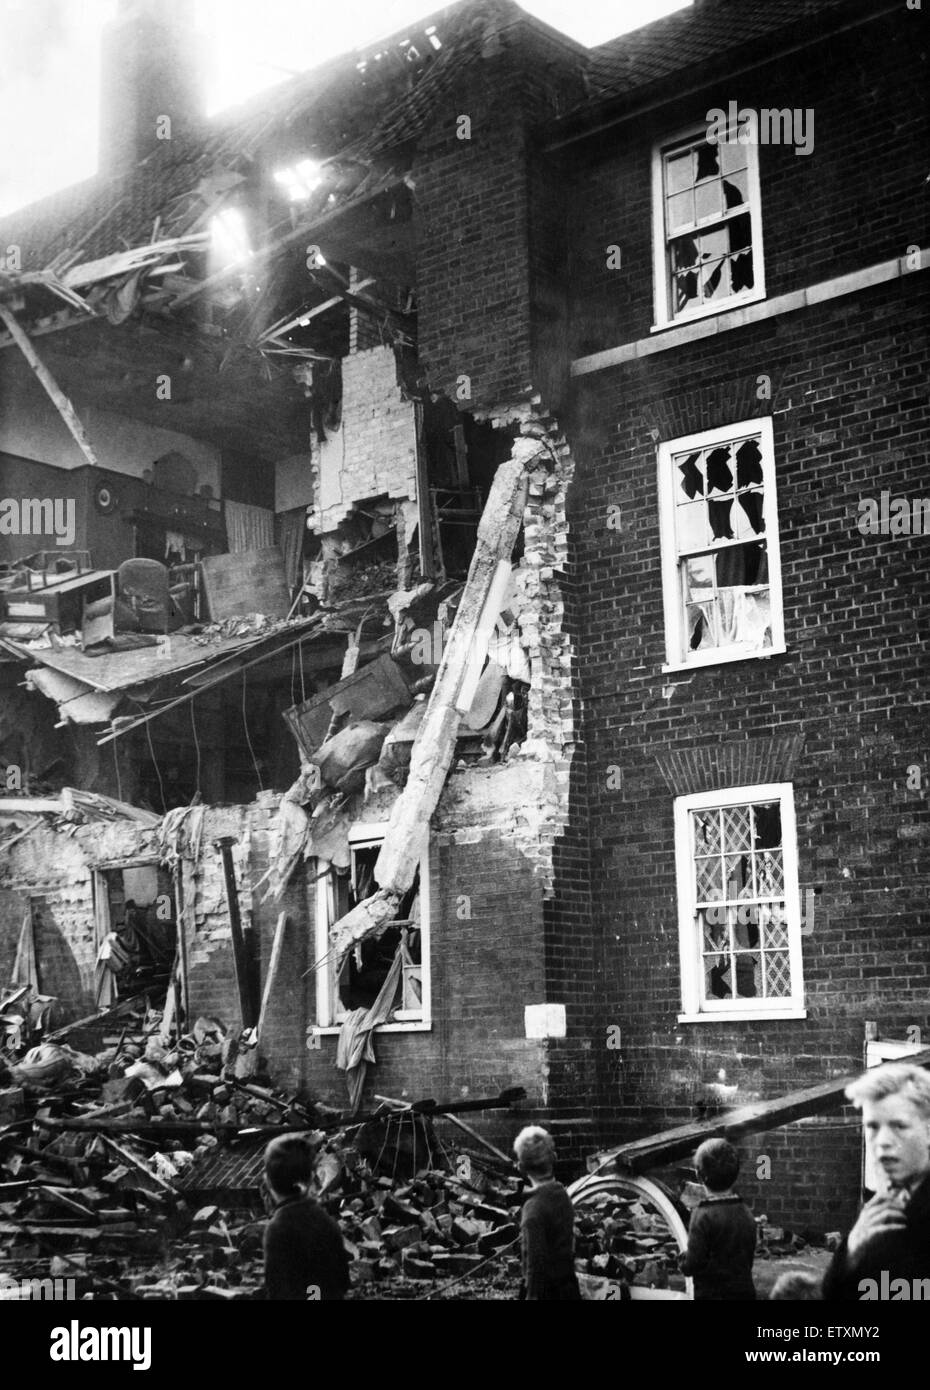 Bomb damage in Liverpool during the Second World War. Damaged tenements which were struck by a bomb during a German air raid in Burlington Street, Liverpool. 17th September 1940. Stock Photo